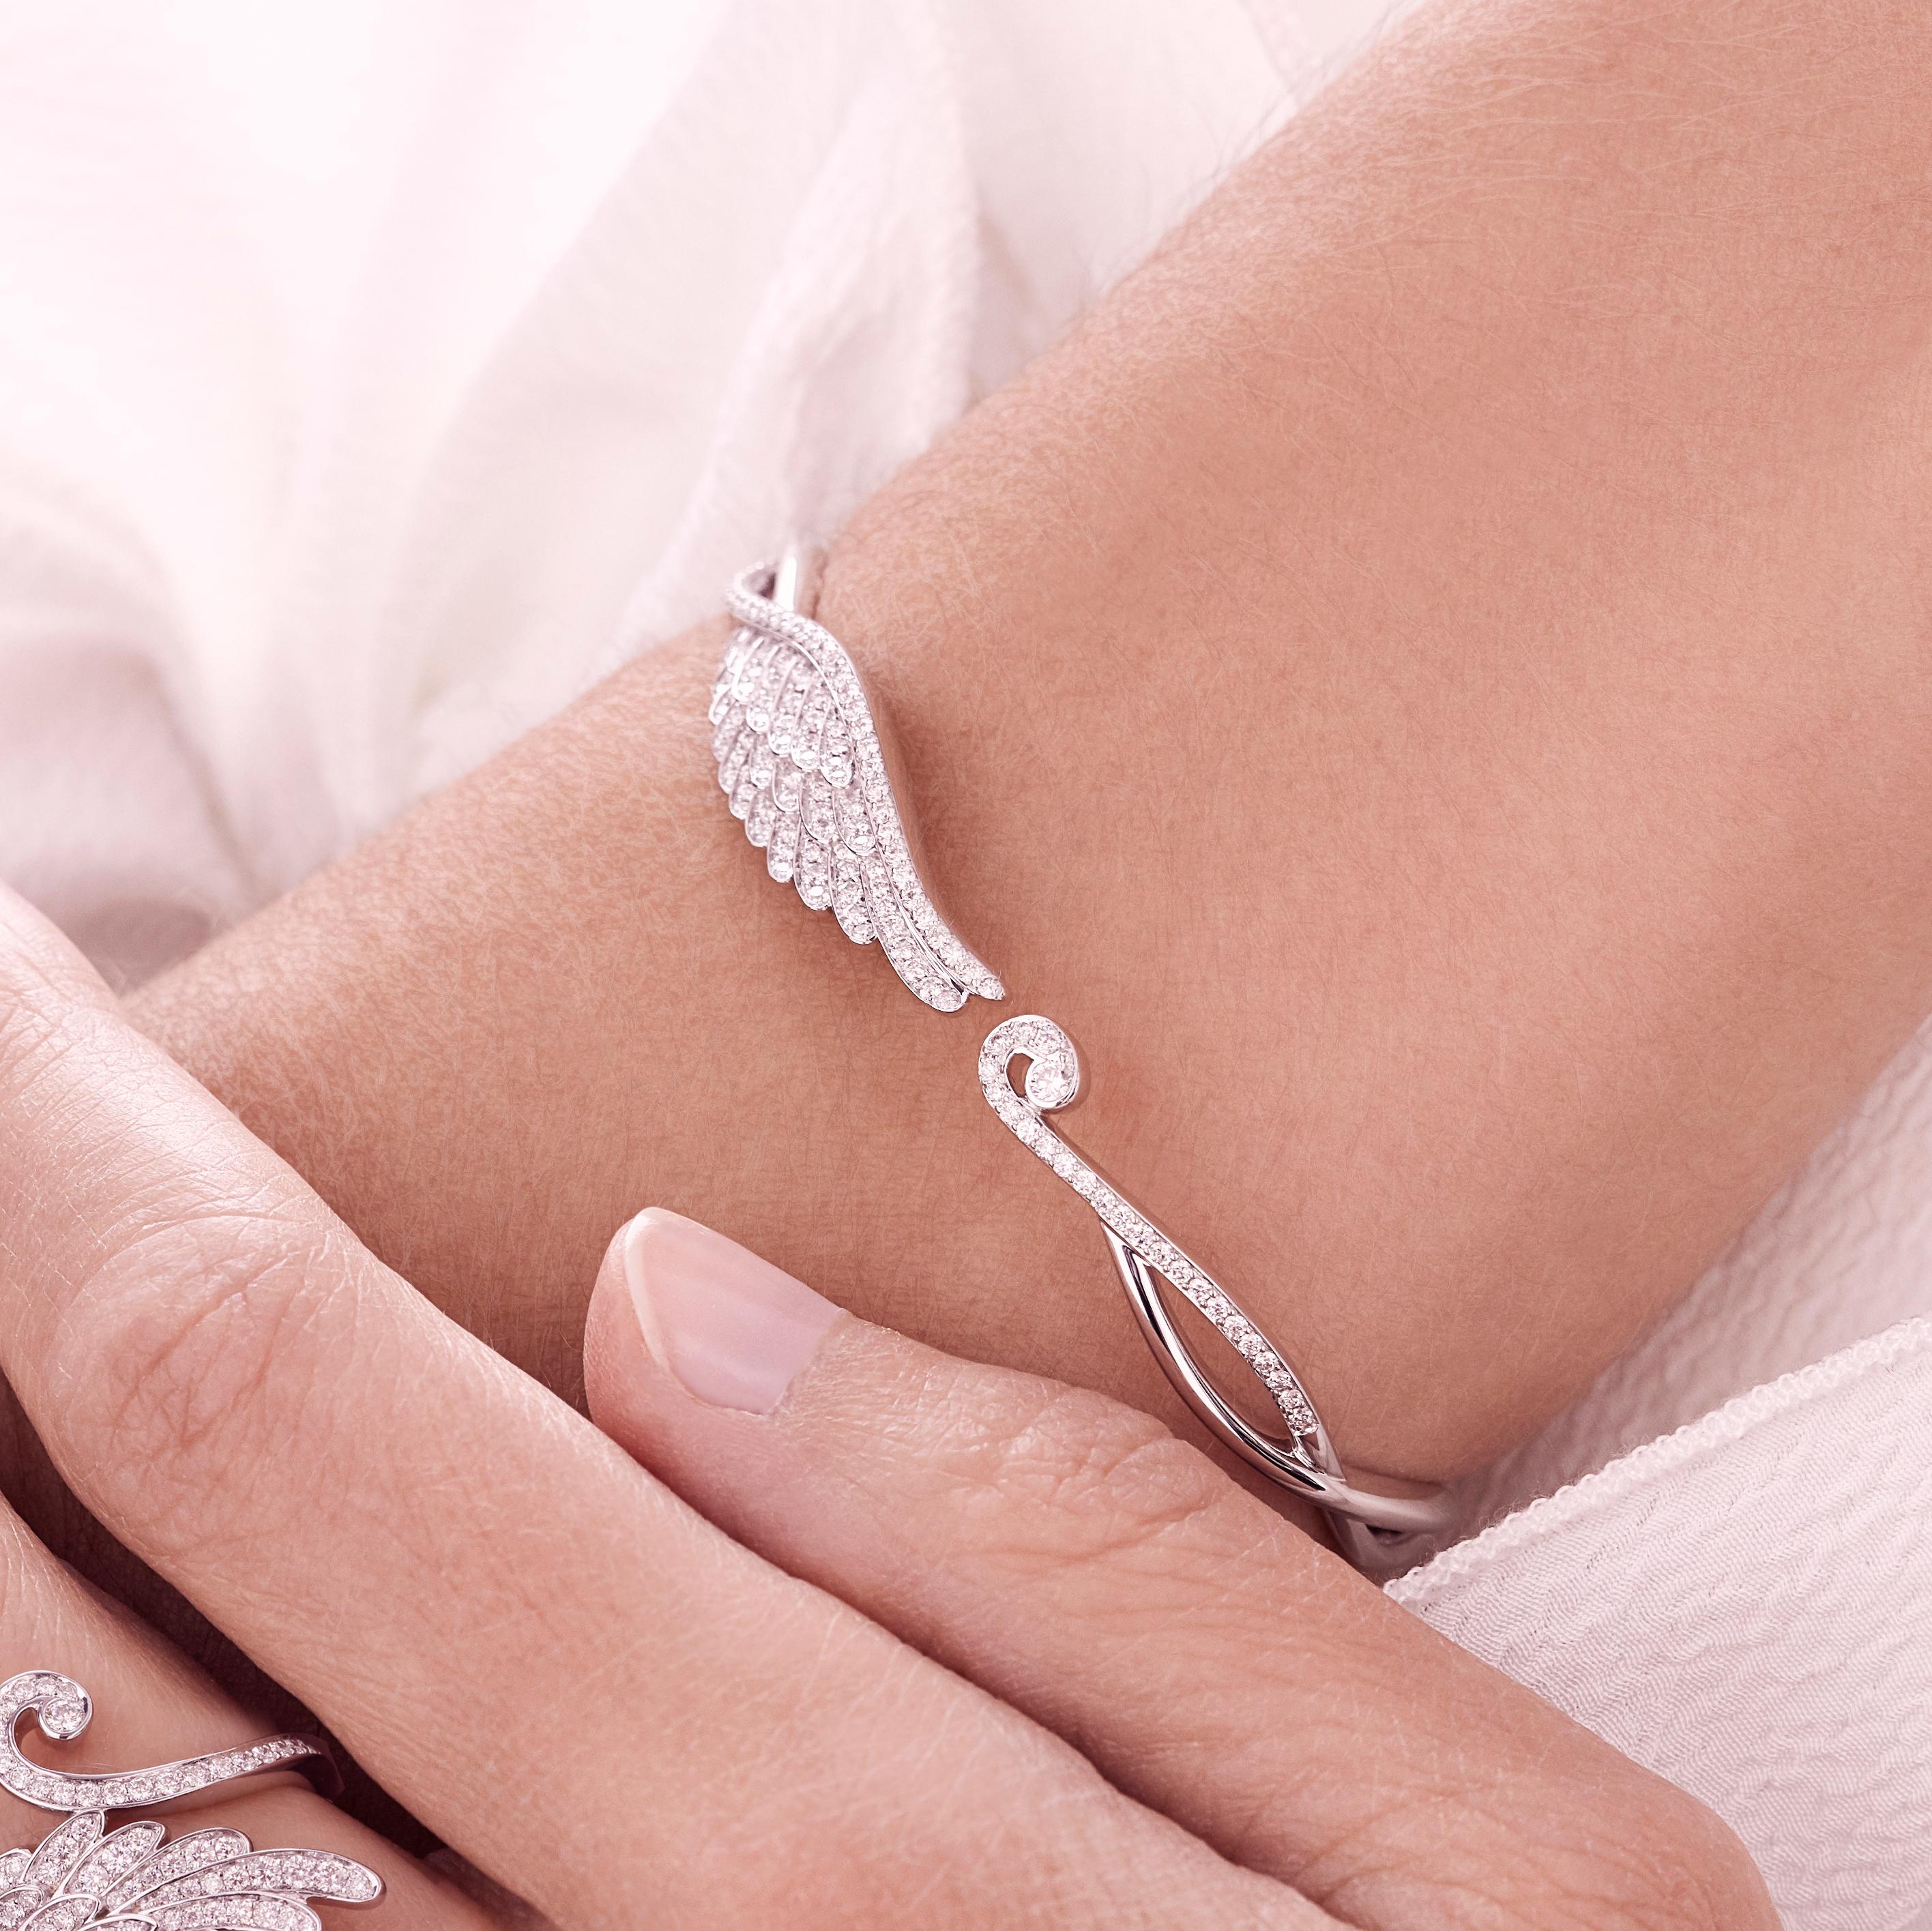 An 18 karat white gold hinged bangle from The House of Garrard Wings Embrace collection set with 138 round white diamonds weighing 1.02 carats. The bangle measures 6cm by 4.5cm.
138 round white diamonds weighing 1.02 carats
Gold weight 19.97 grams.